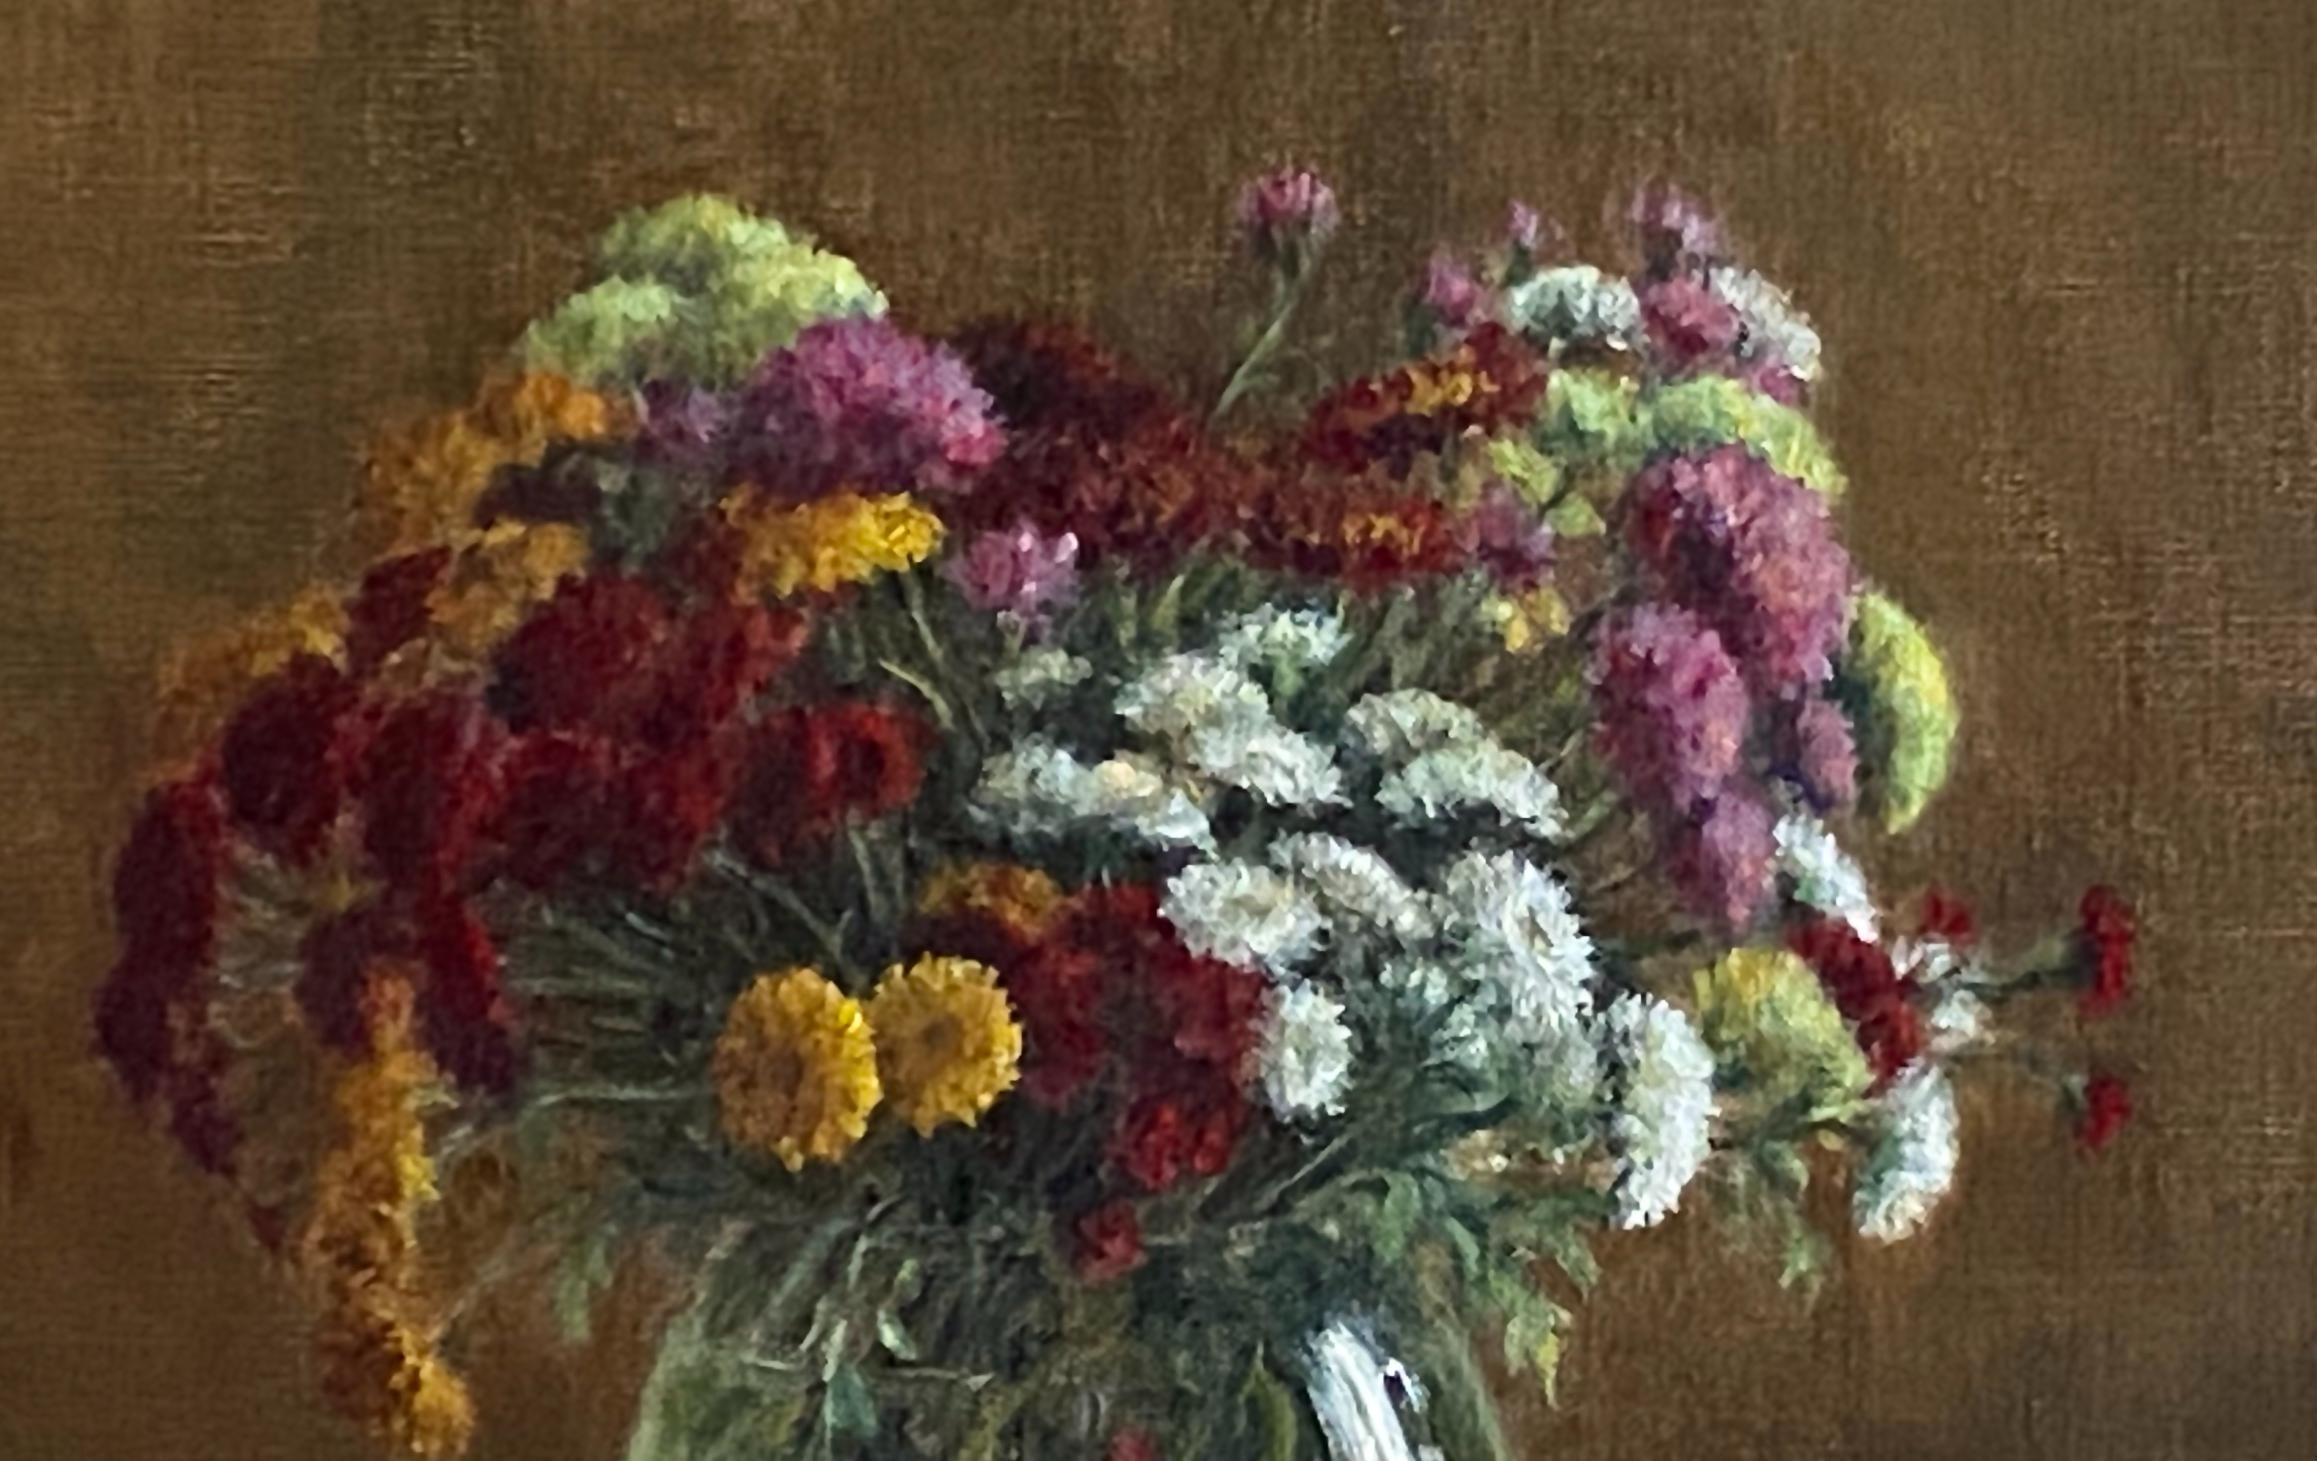  Chrysanthemums is a 16 x 20 Oil Painting European Artist/Croatian artist Tina Orsolic Dalessio who classically trained..

Tina Orsolic Dalessio is a figurative  and still-life painter born in Zagreb, Croatia.  She received her formal academic